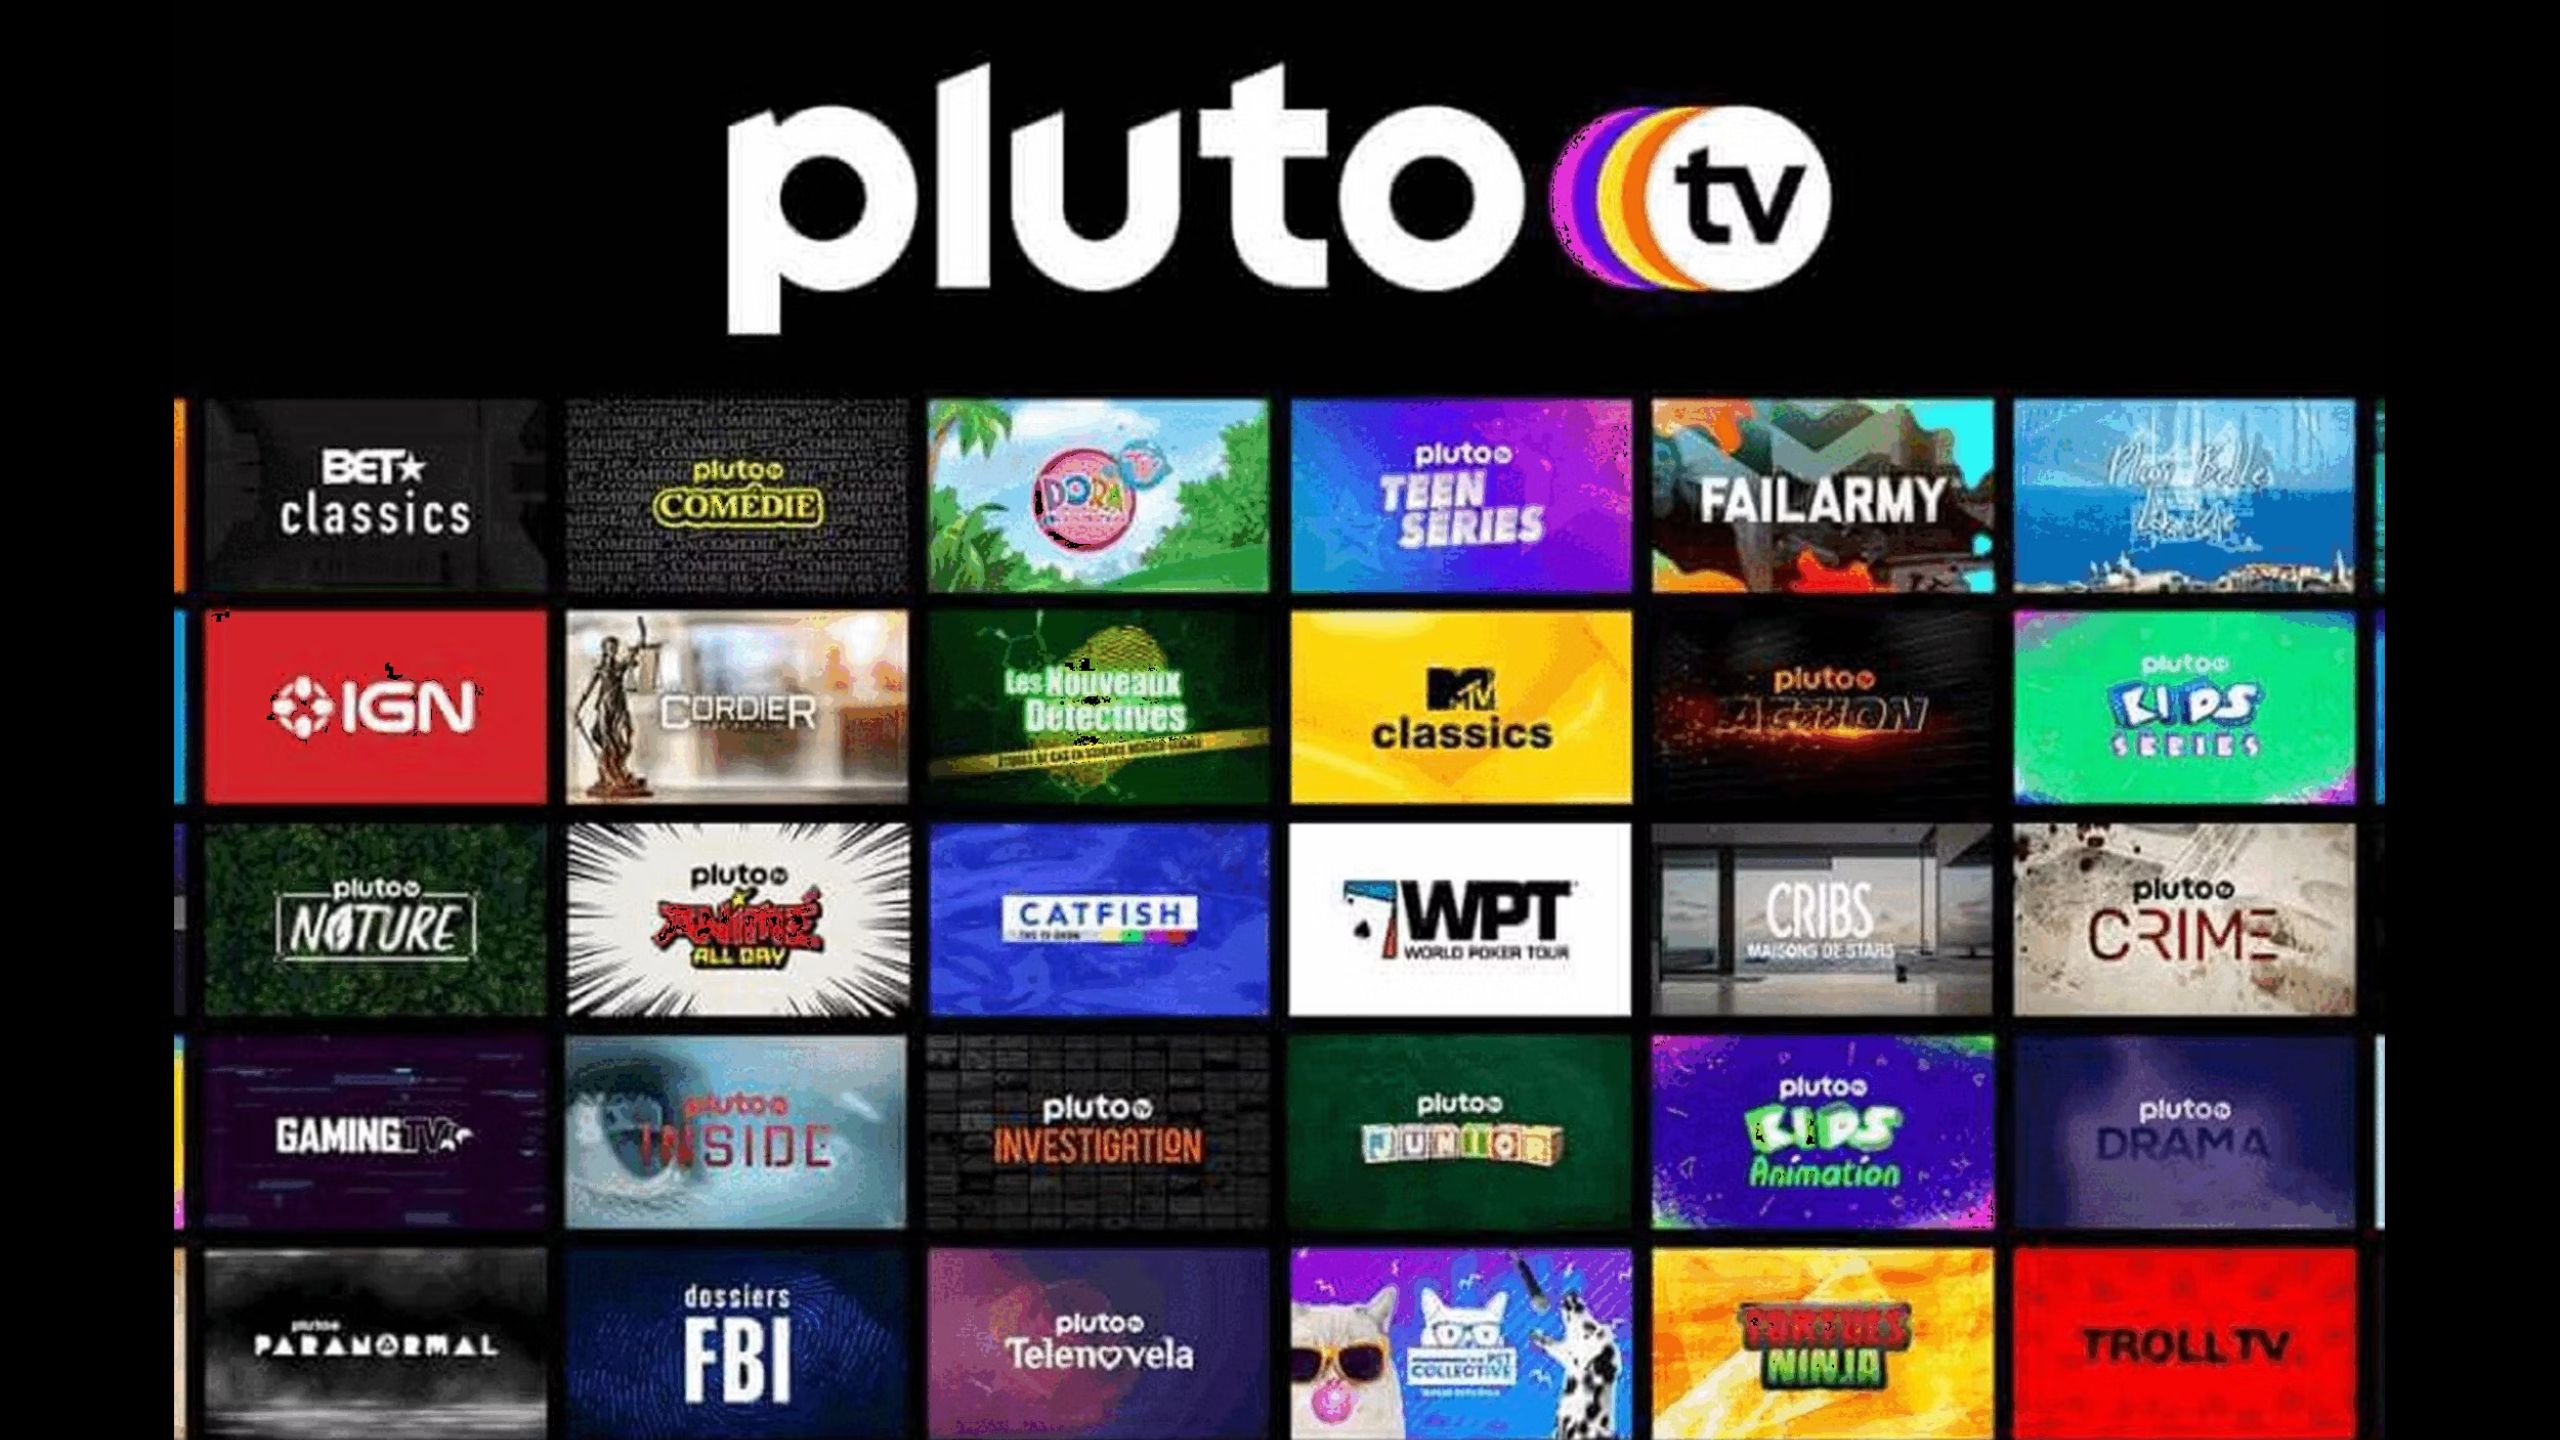 Pluto TV channel selection.